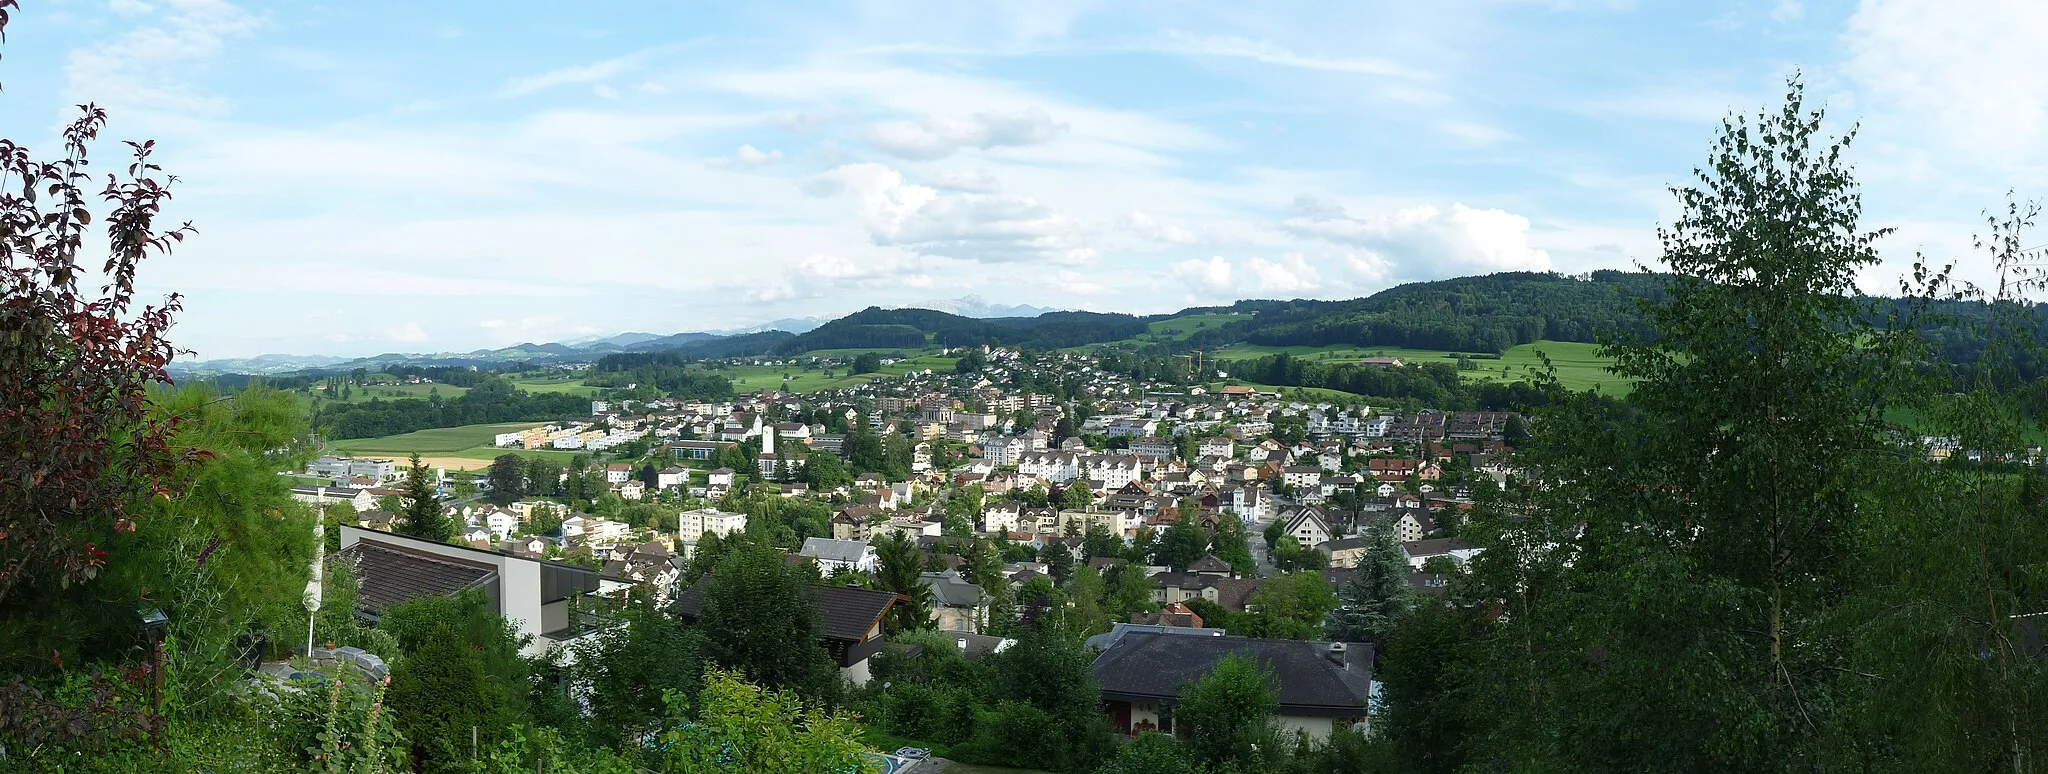 Photo showing: Oberuzwil, SG, Switzerland. Taken from Vogelsberg, stitched out of 4 photos